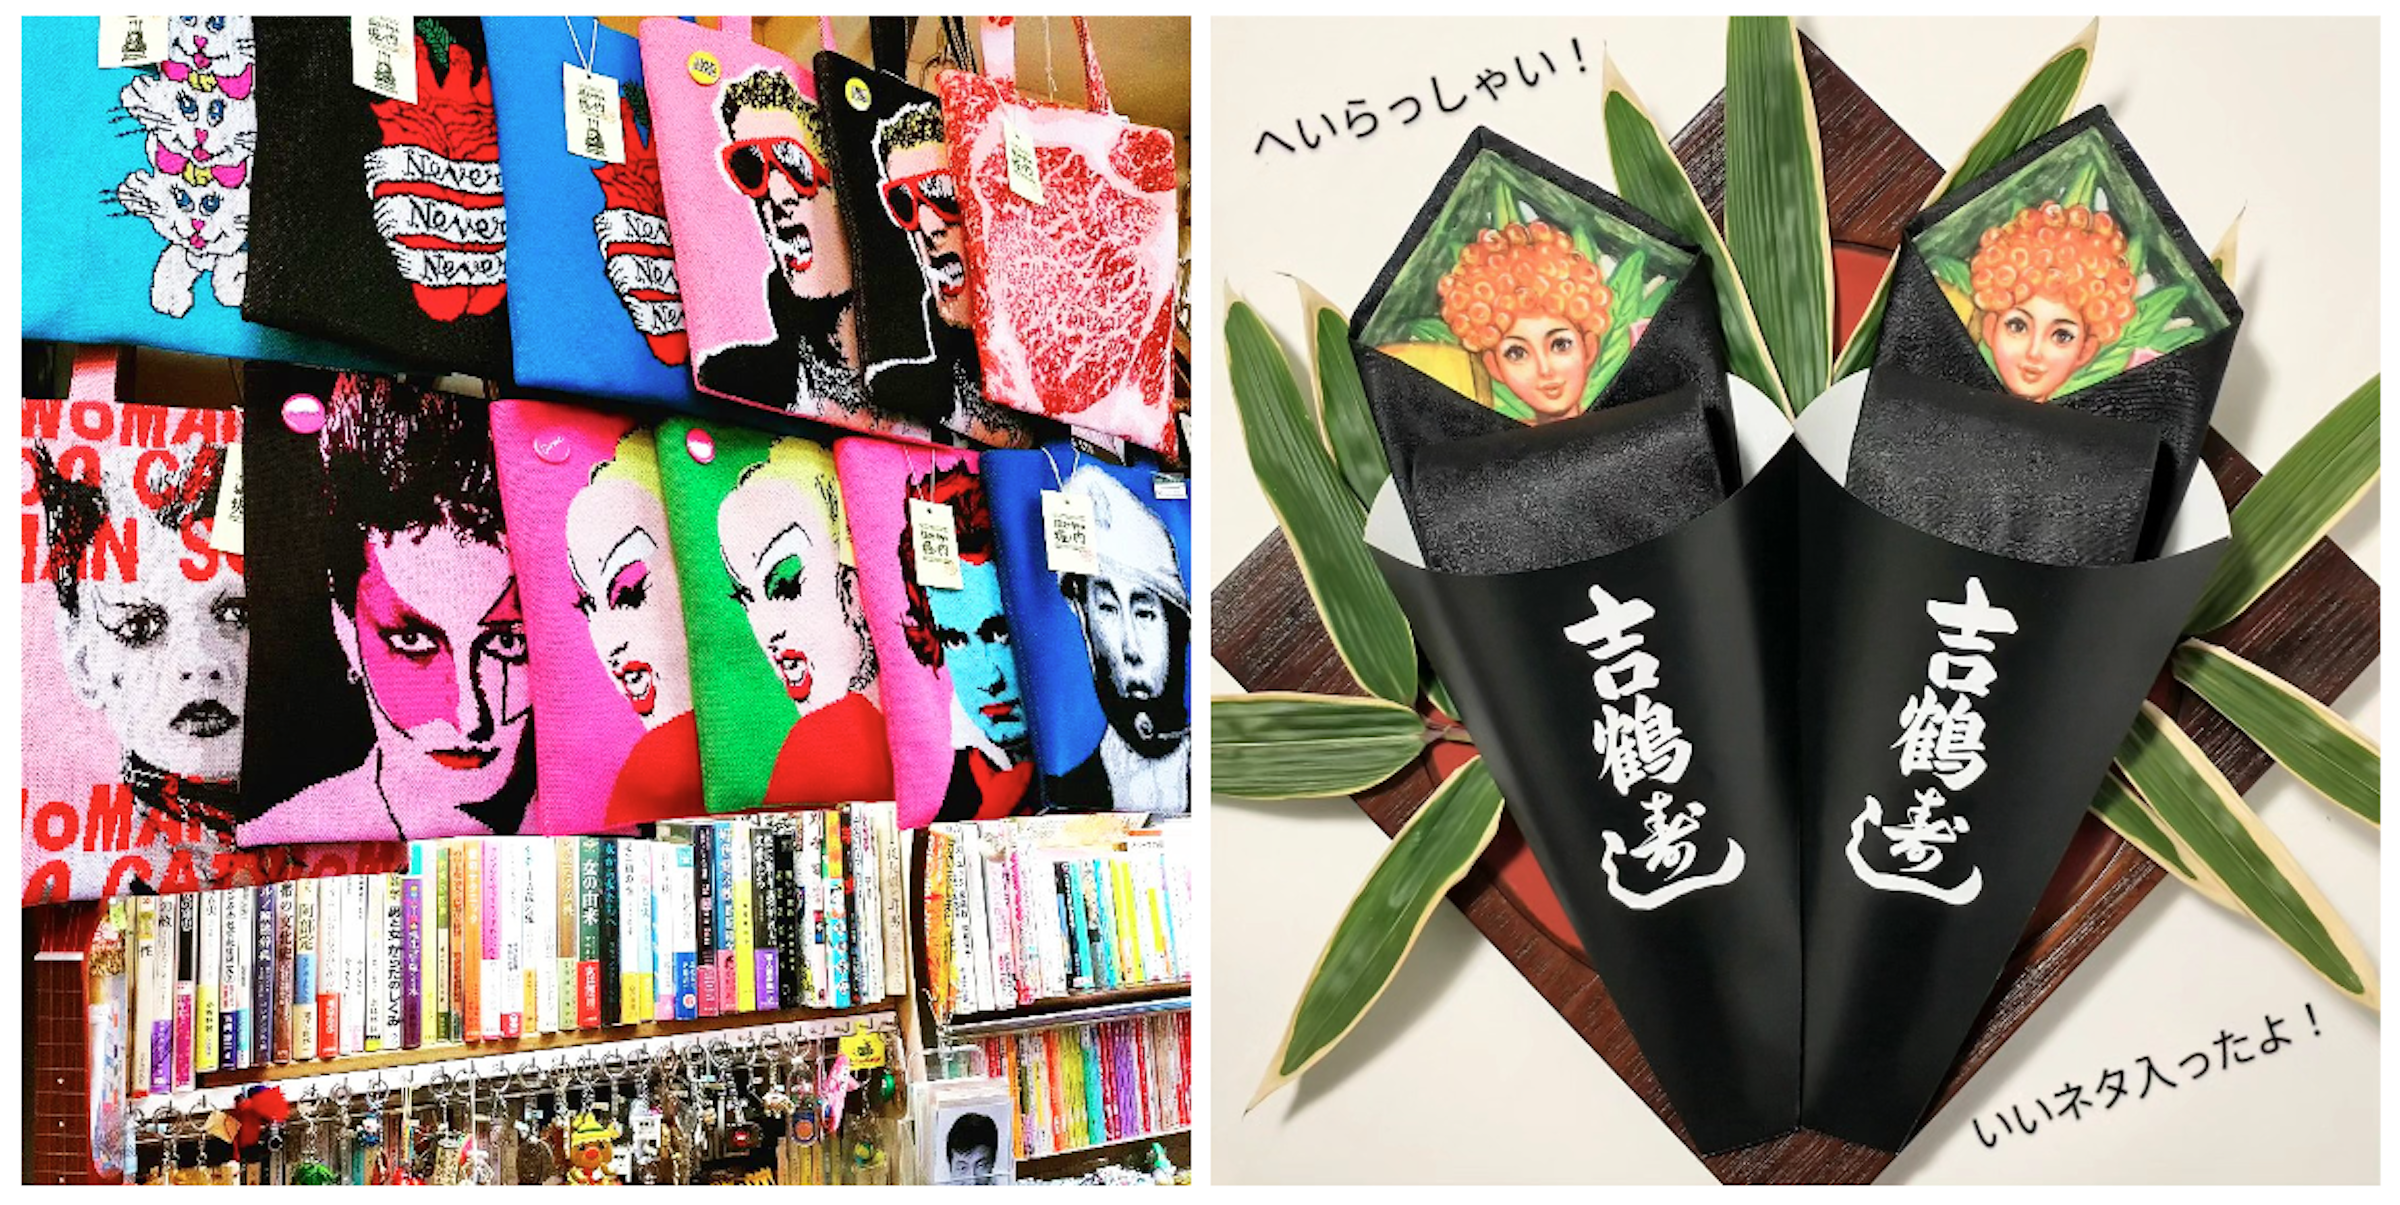 A mixture of various knit bags by Amimono☆Horinouchi and the original Tsuruya product, 'Edible Ties'. The neckties featuring Rina Yoshioka's illustrations are a highly impactful item